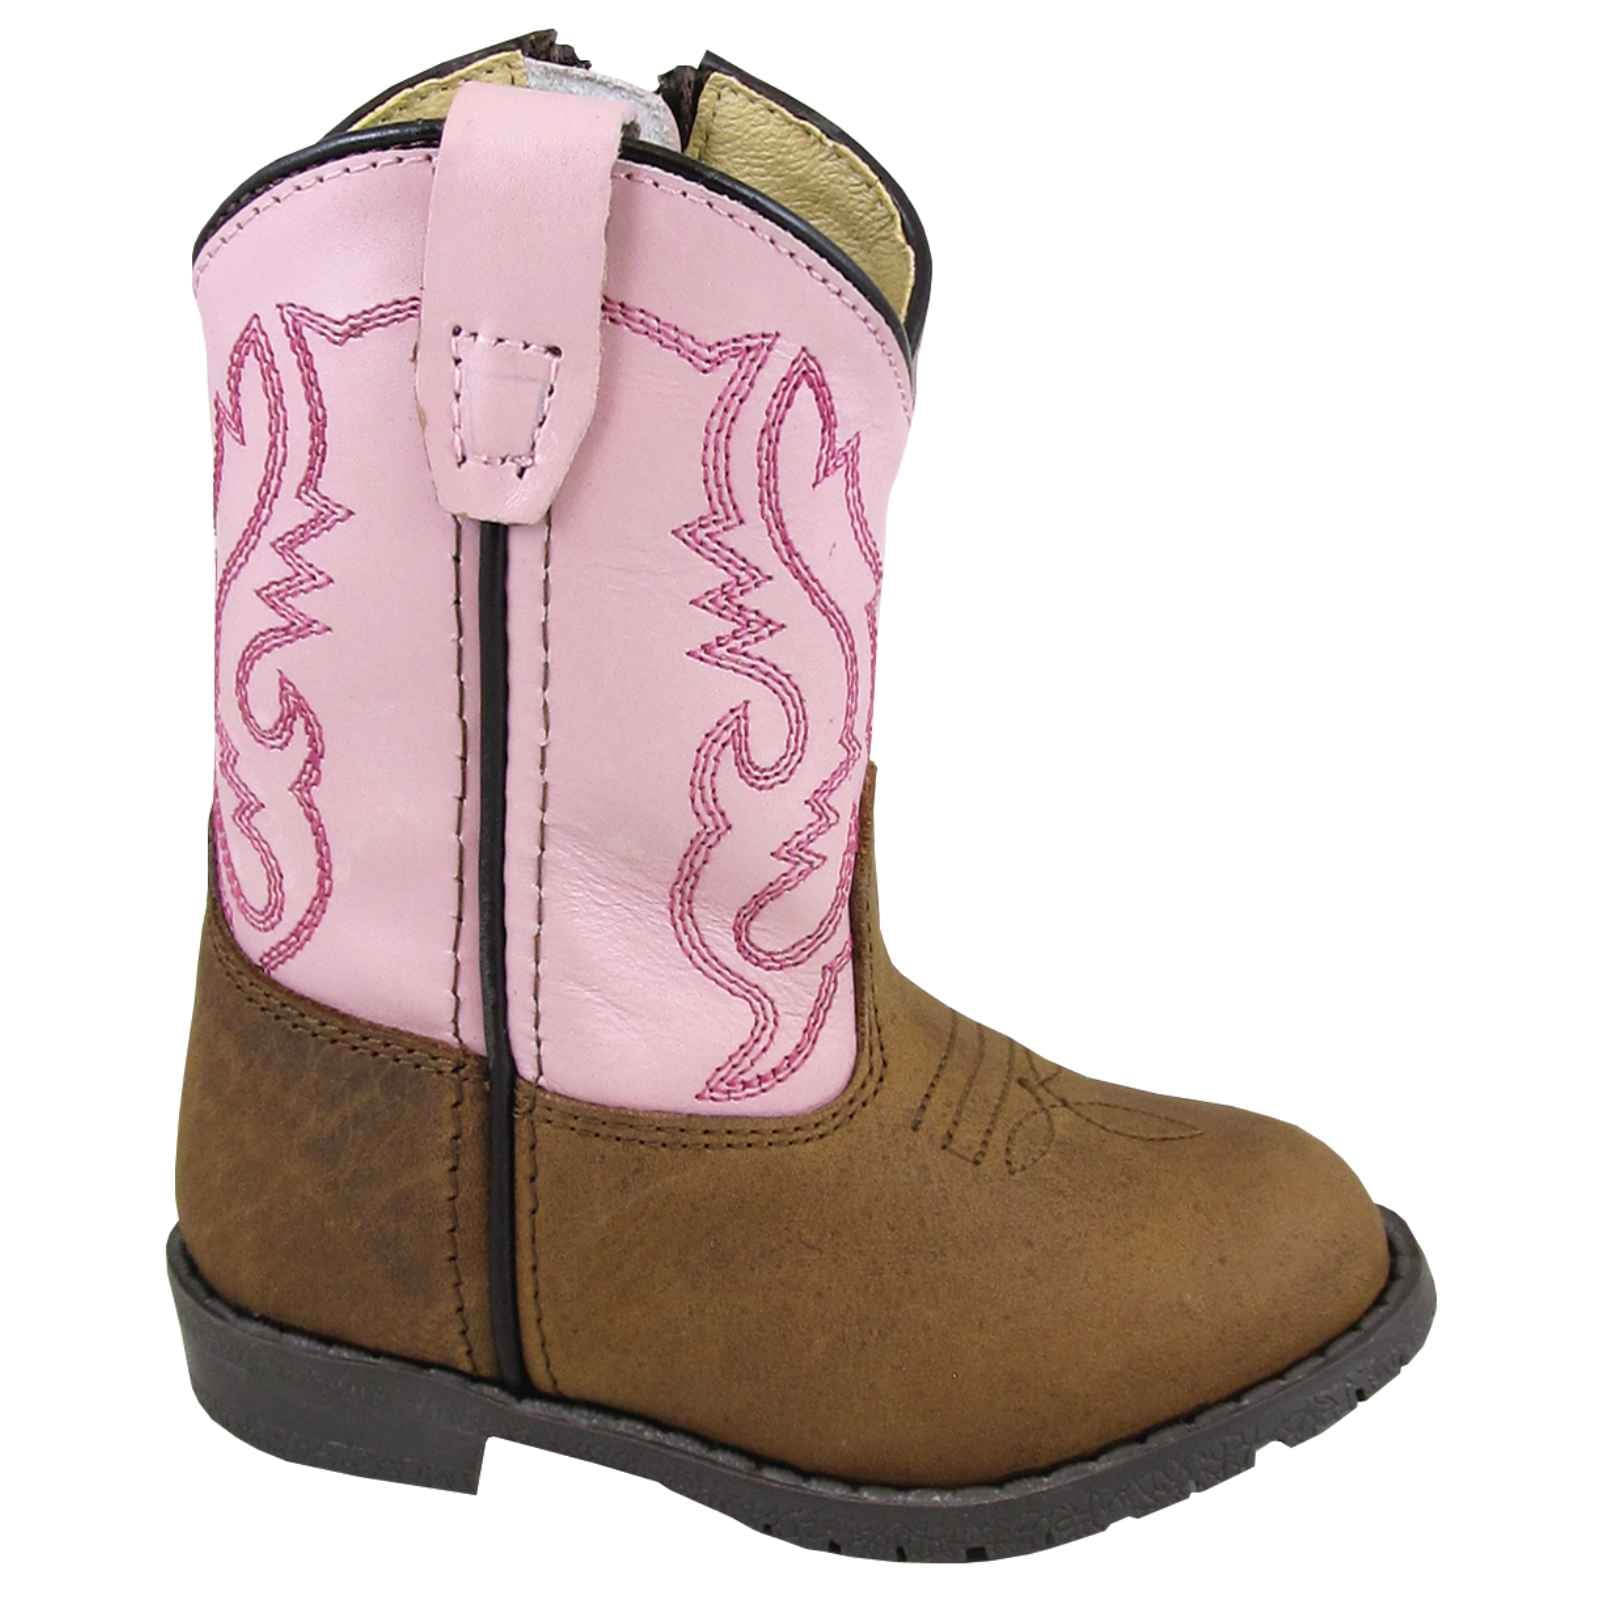 Toddler Western Boot Smoky Mountain Boots U-Toe Leather Hopalong Series Distressed Design Man-Made Lining TPR Sole & Walking Heel 